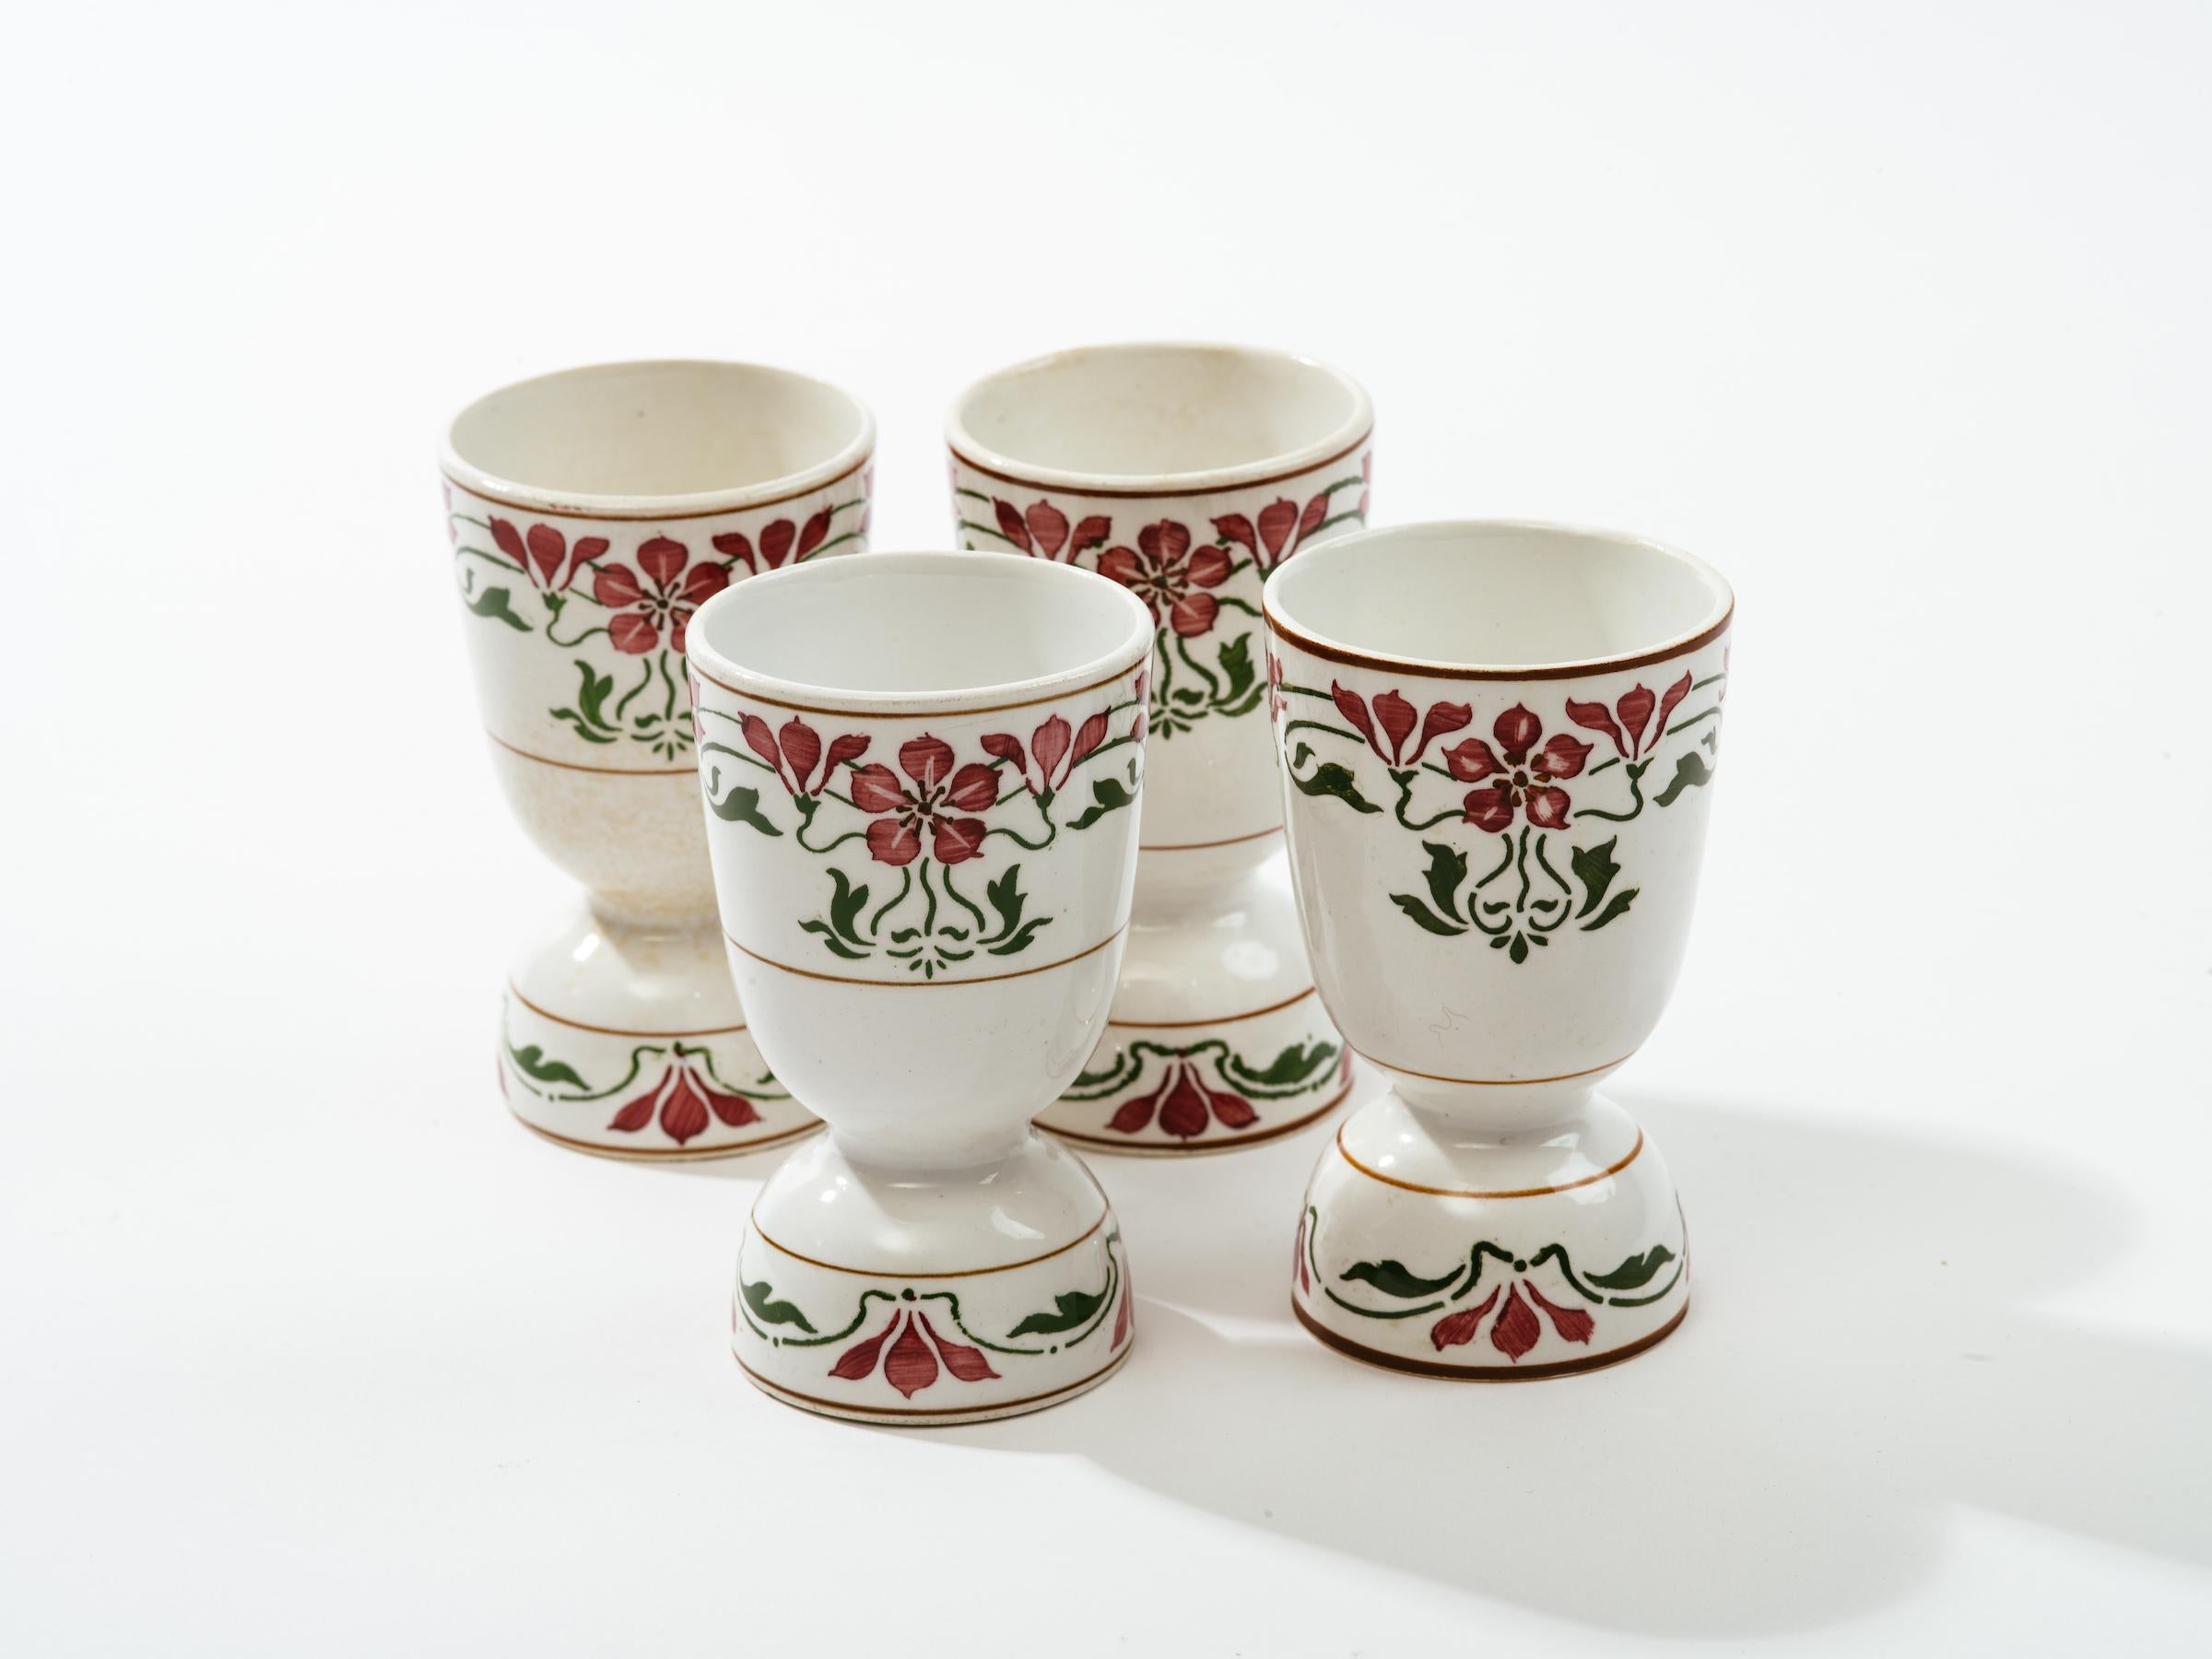 Set of four Jugendstil Saxony Poppy porcelain egg cups by Villeroy and Boch, Dresden,
Germany, dating between 1874- 1909. Beautiful stylized Art Nouveau flower pattern all around white porcelain cups.